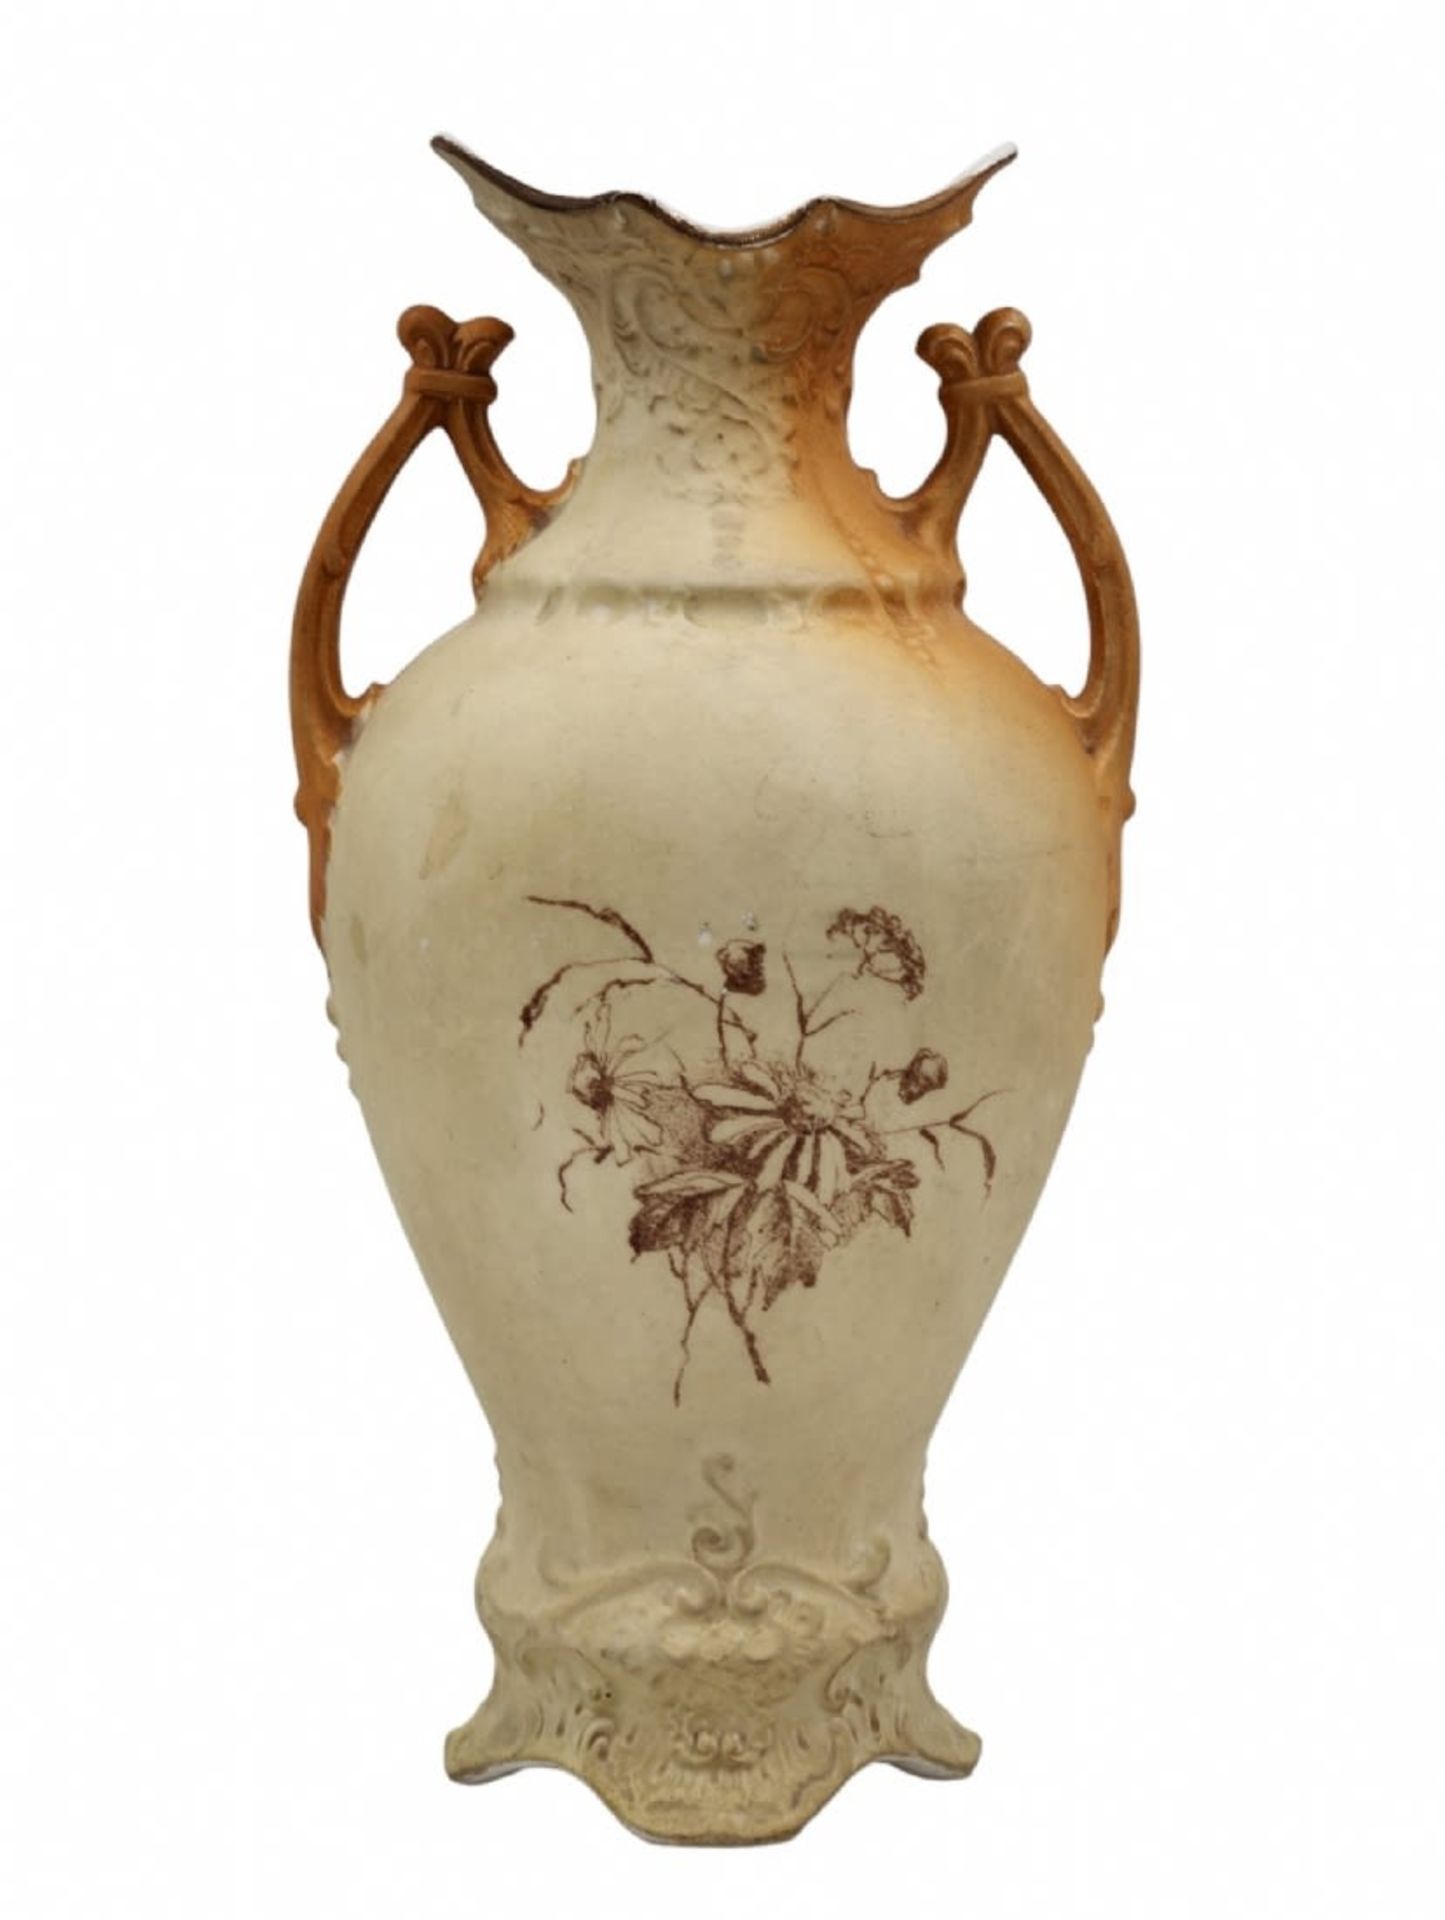 An antique Austrian vase from the last quarter of the 19th century, made of porcelain decorated, - Image 2 of 5